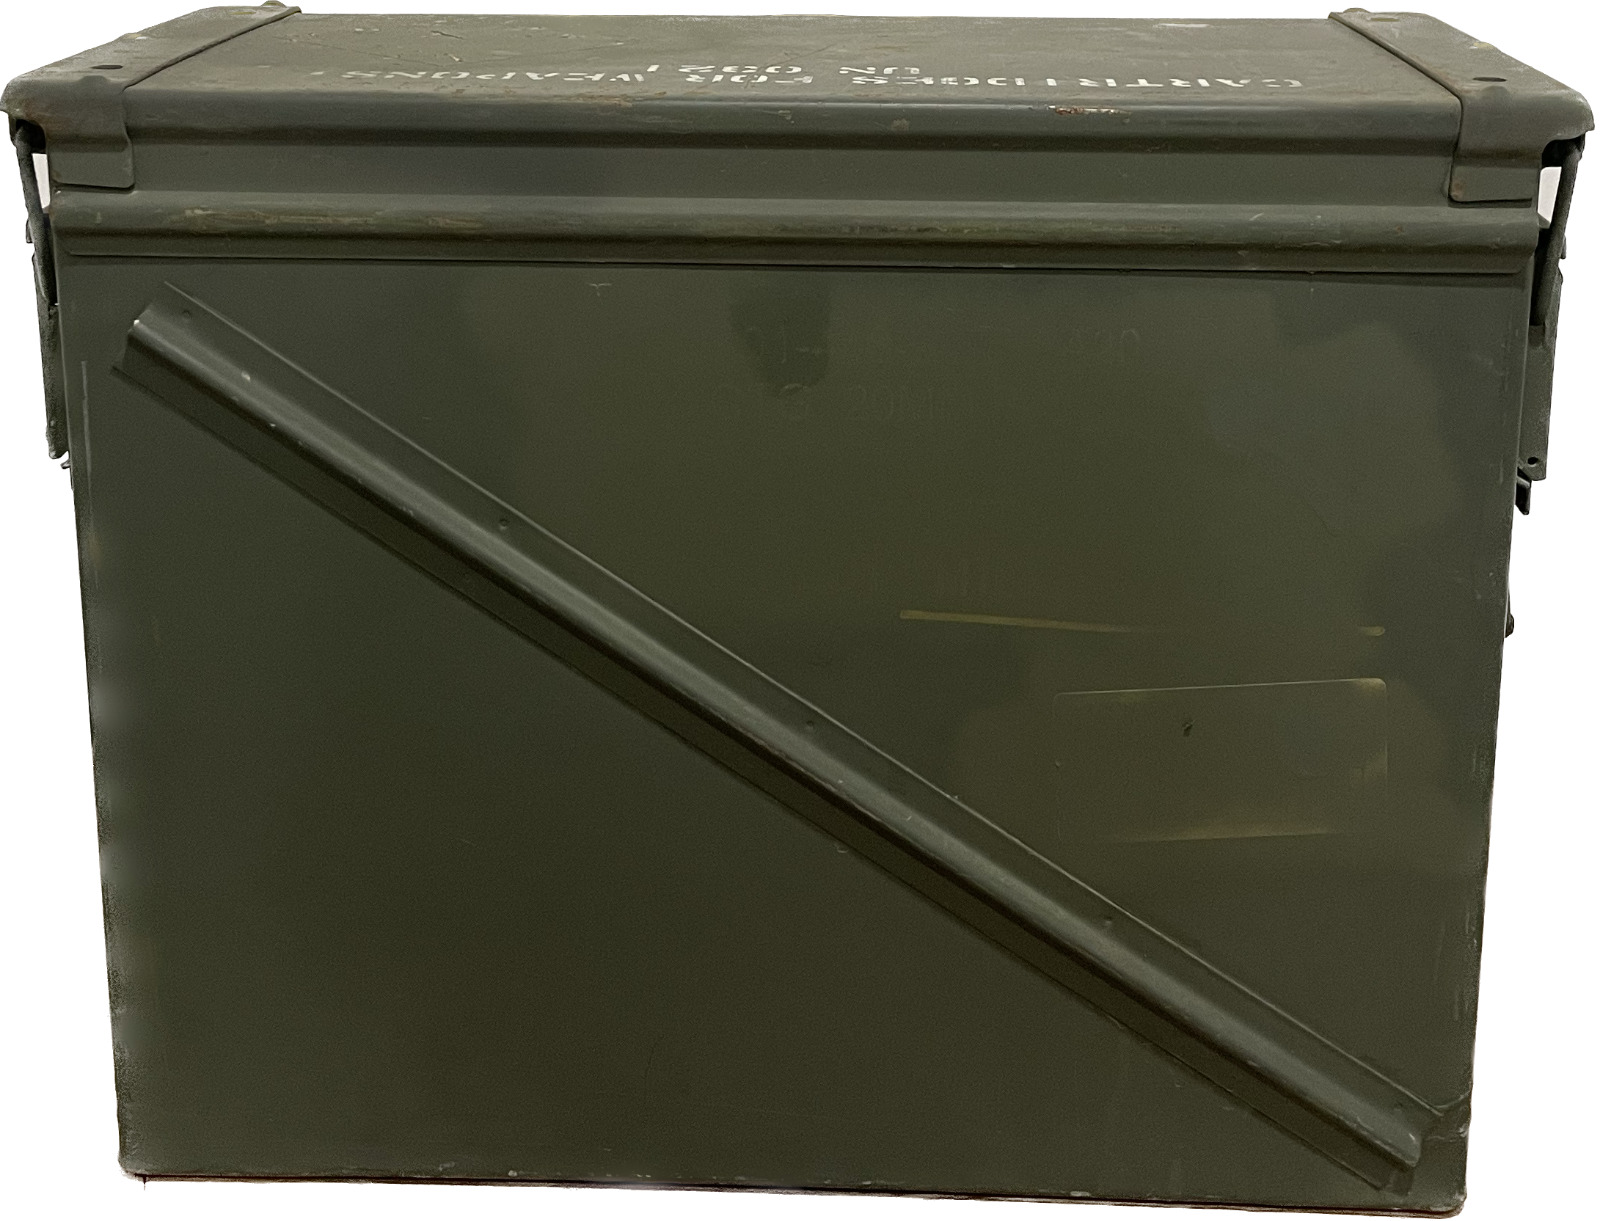 USGI 20mm AMMO CAN M548 1500 ROUNDS 7.62 METAL LARGE AMMO CAN Grade 2